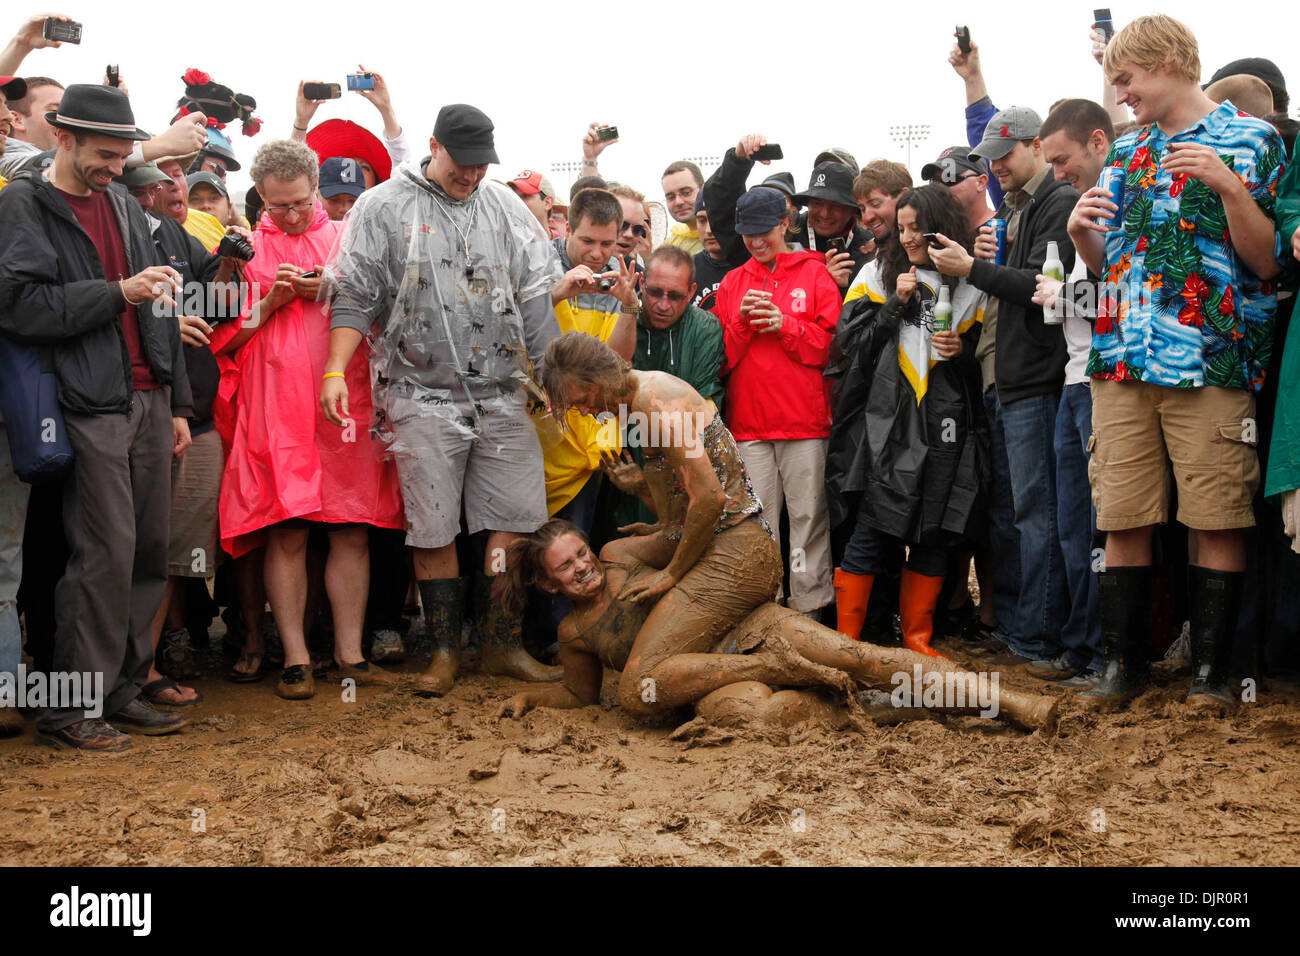 May 01, 2010 - Louisville, Kentucky, U.S. - Sarah Silverstein, Raleigh, N.C., pinned Kelly Schwerzler, New Jersey, in an infield mud-wrestling match at the 136th running of the Kentucky Derby at Churchill Downs Saturday May 1, 2010. Photo by David Stephenson (Credit Image: © Lexington Herald-Leader/ZUMApress.com) Stock Photo